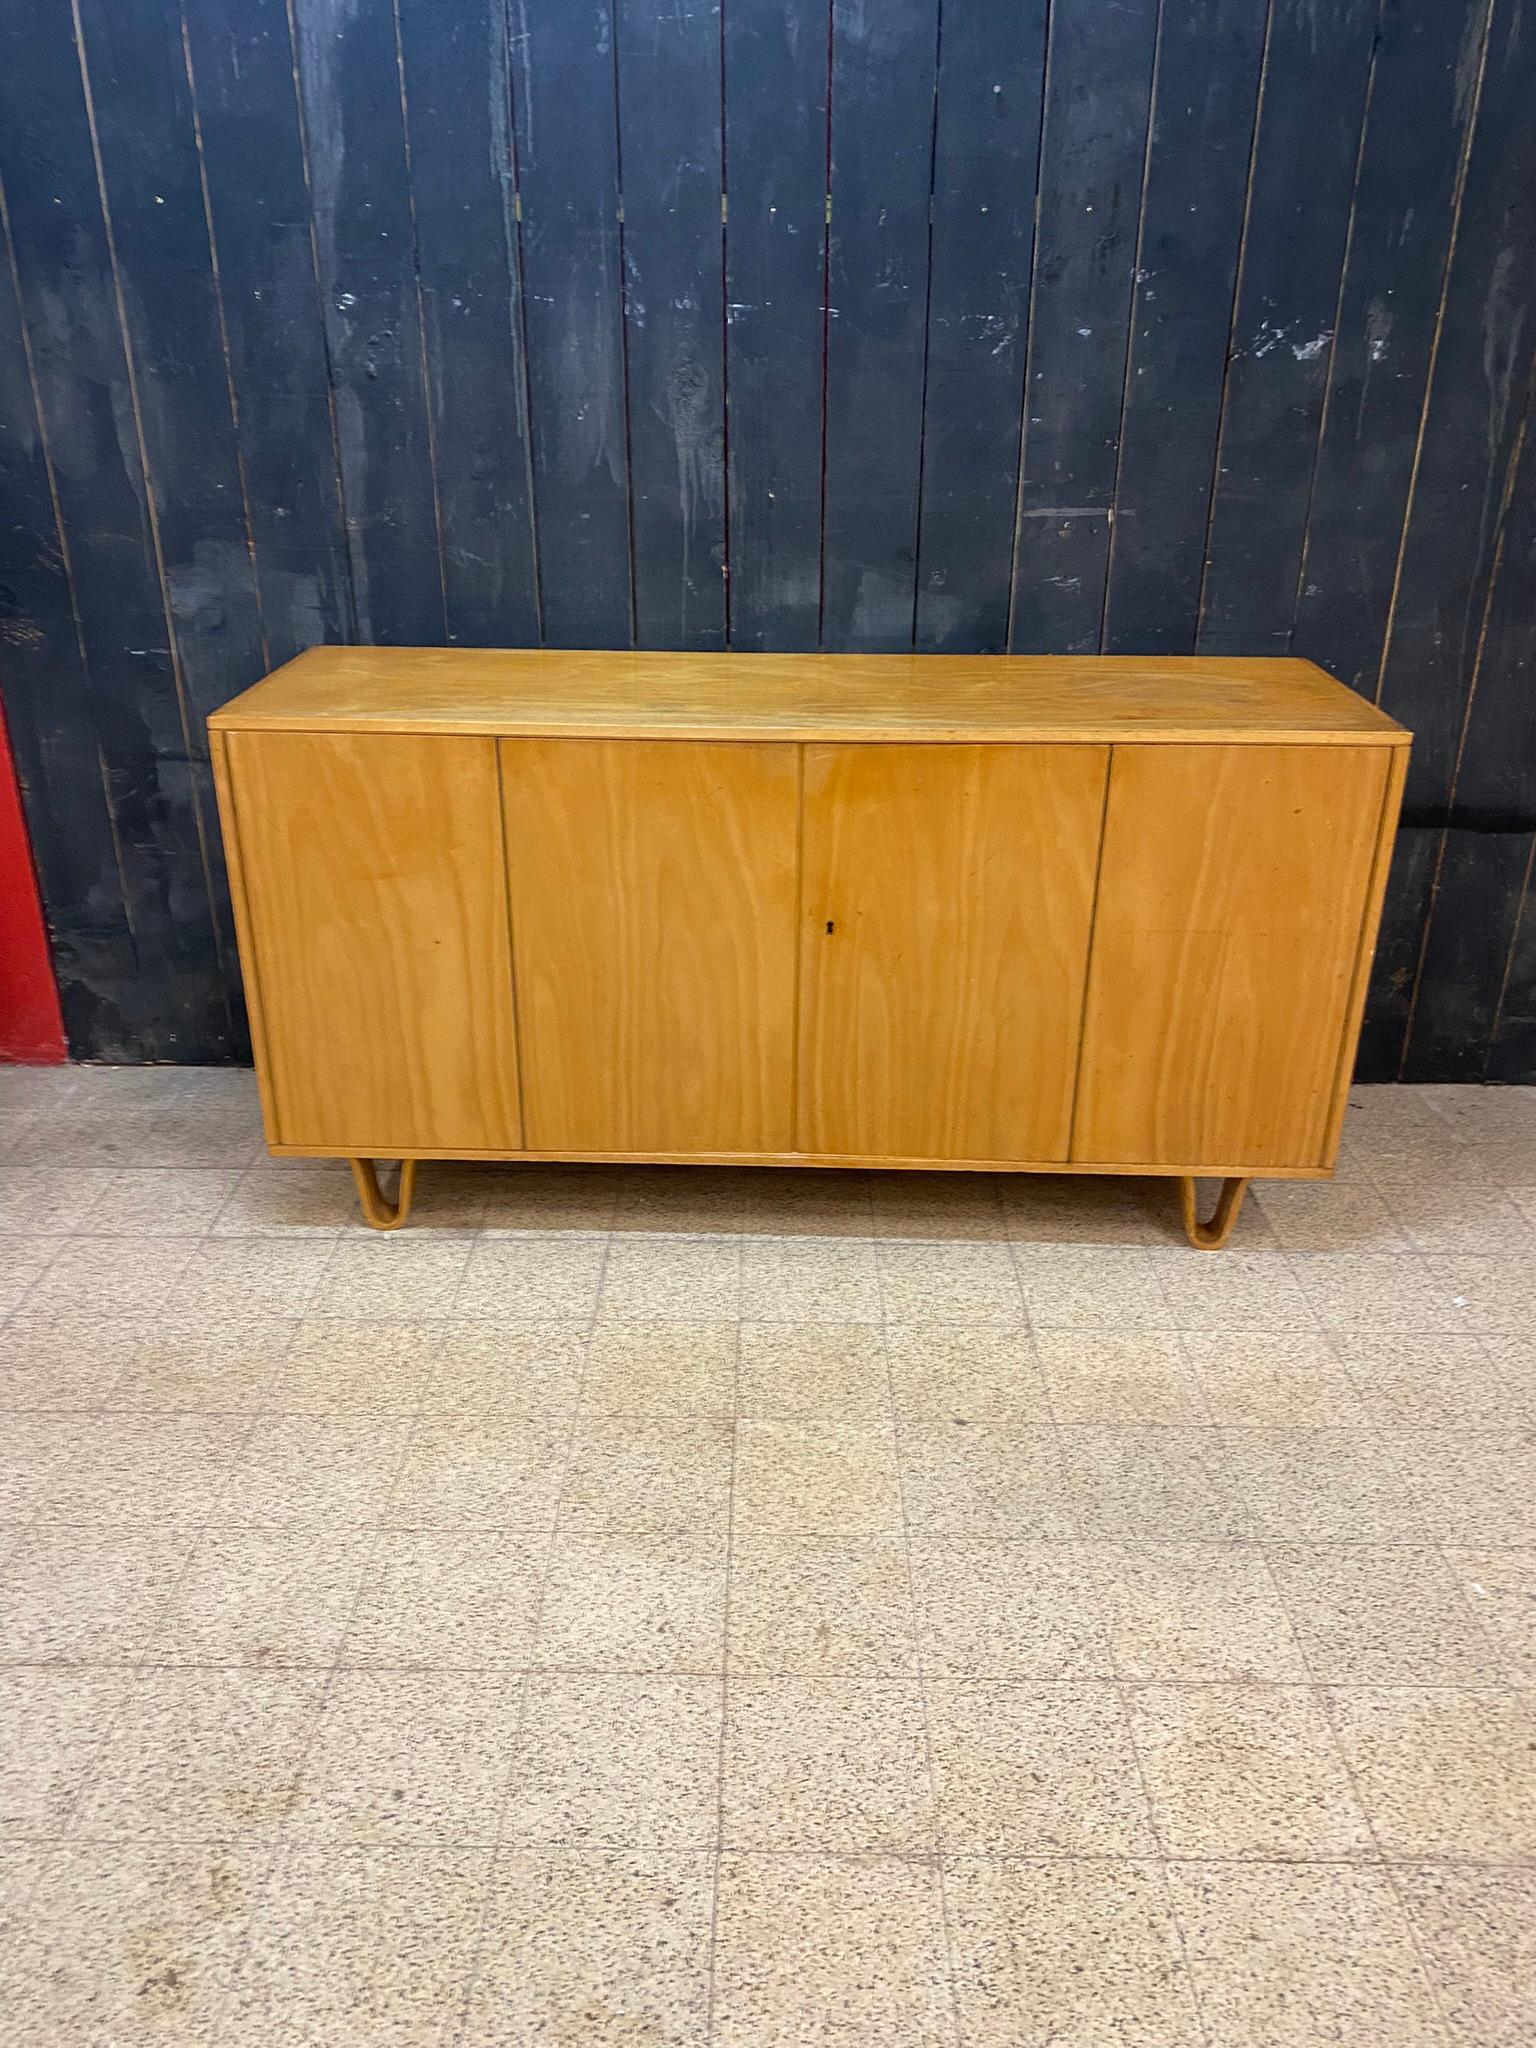 Cees Braackman, sideboard for Editions Pastoe, circa 1950
varnish to redo.